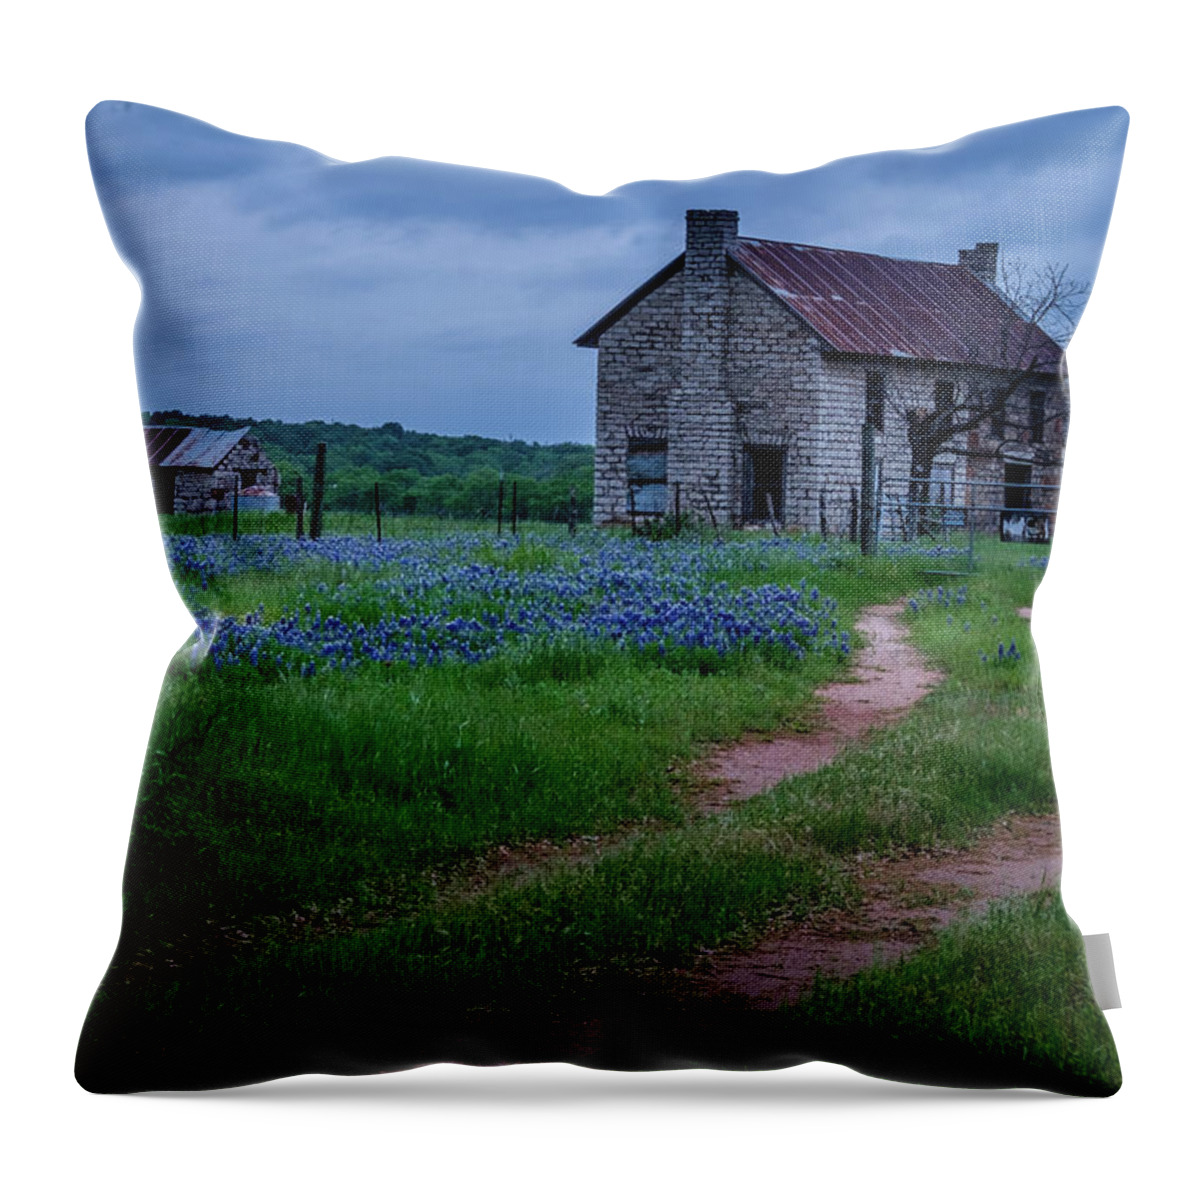 A Dirt Road Leads To A Charming 1800 Era Stone House In The Texas Hill Country As An Evening Storm Rolls In. Throw Pillow featuring the photograph The Road Home by Johnny Boyd